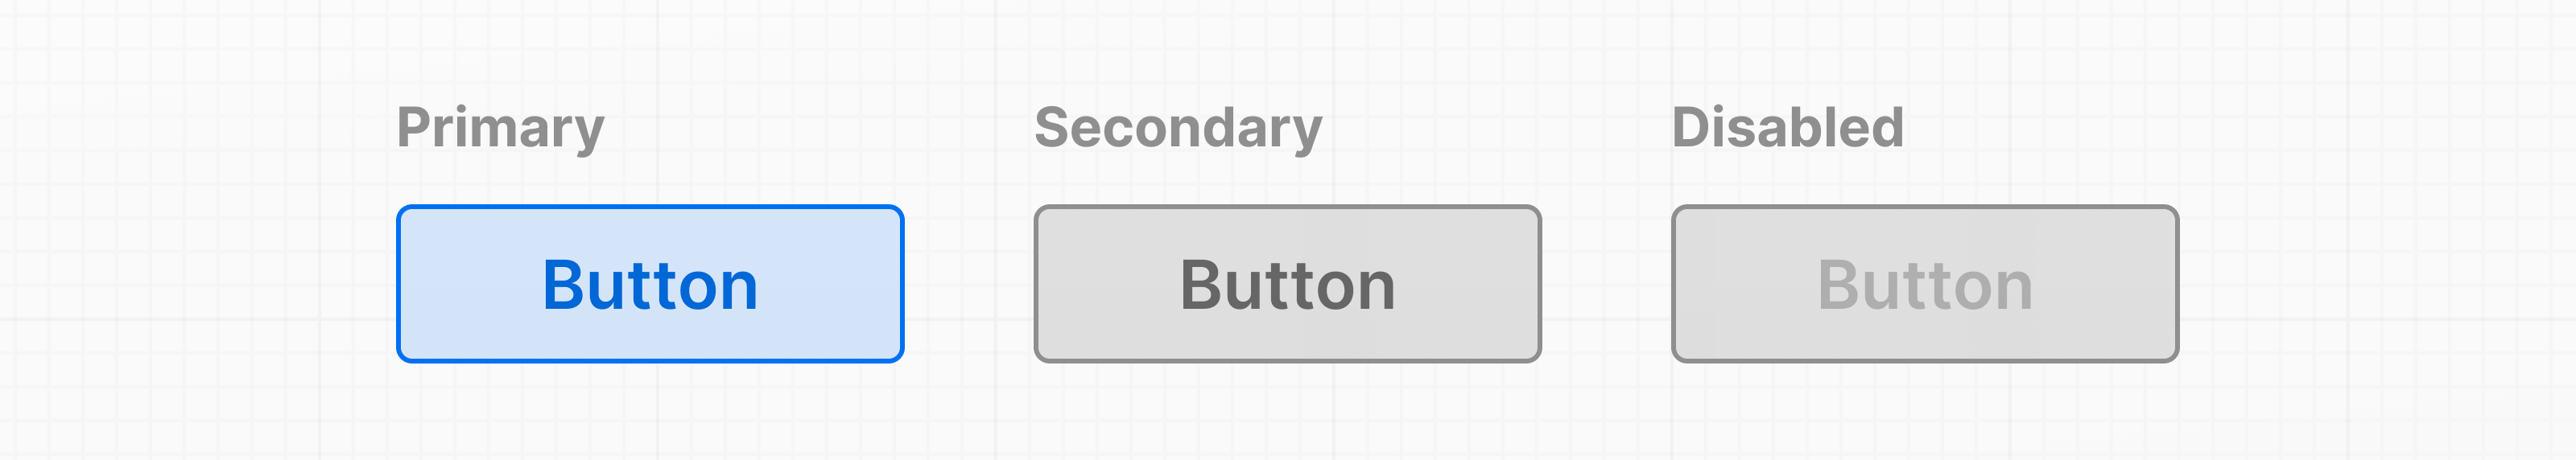 Diagram showing 3 variations of a button component: Primary, Secondary, and Disabled